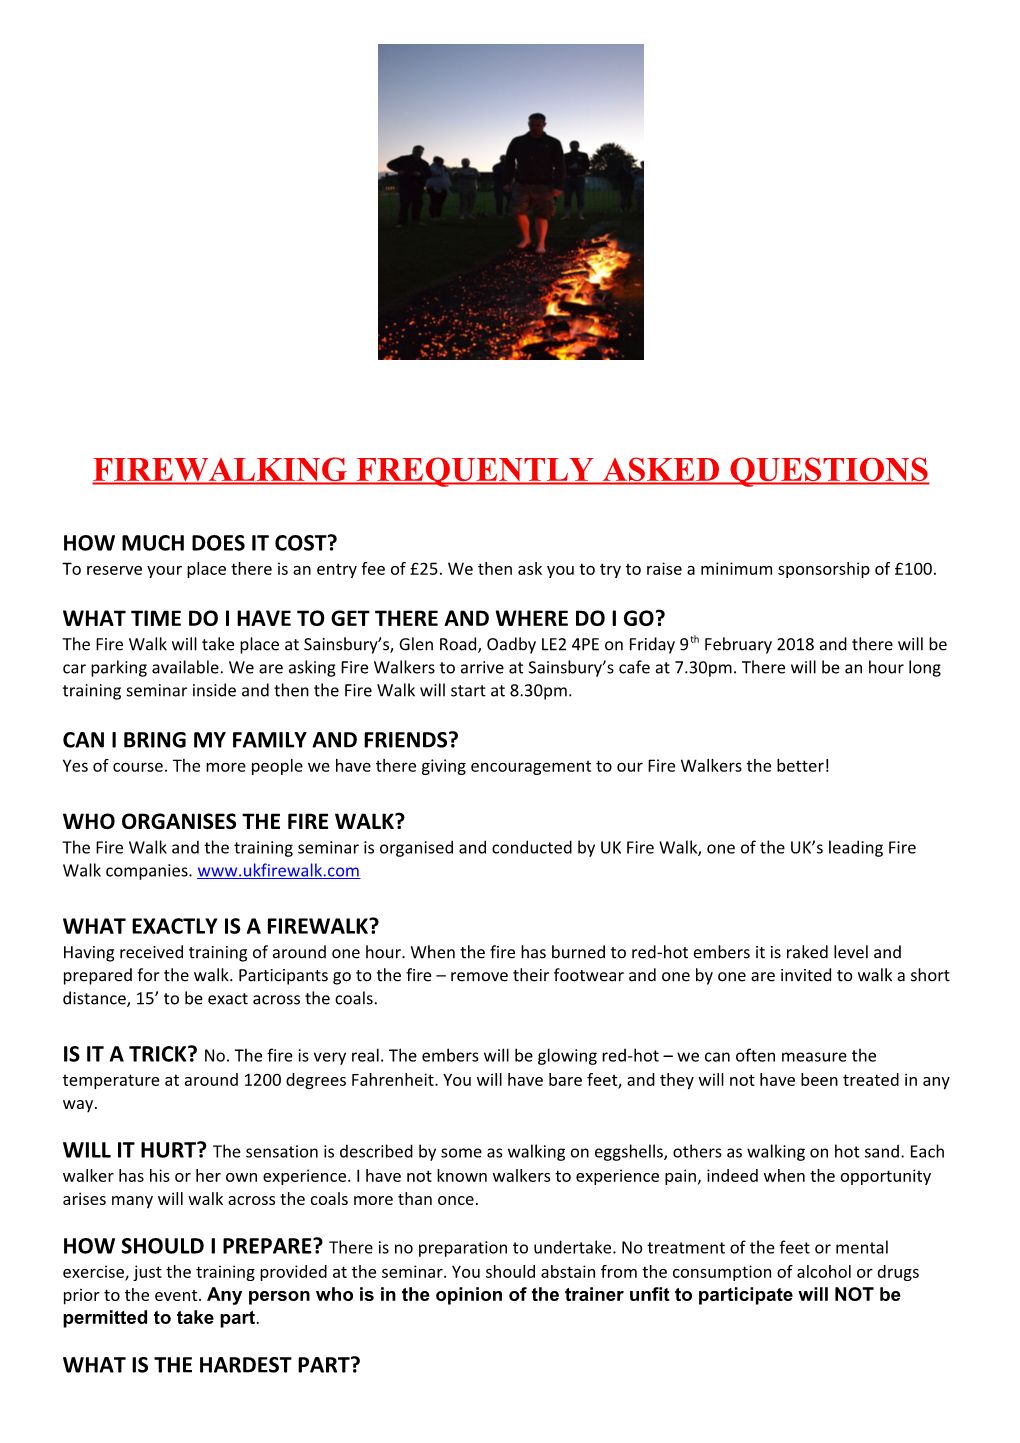 Firewalking Frequently Asked Questions